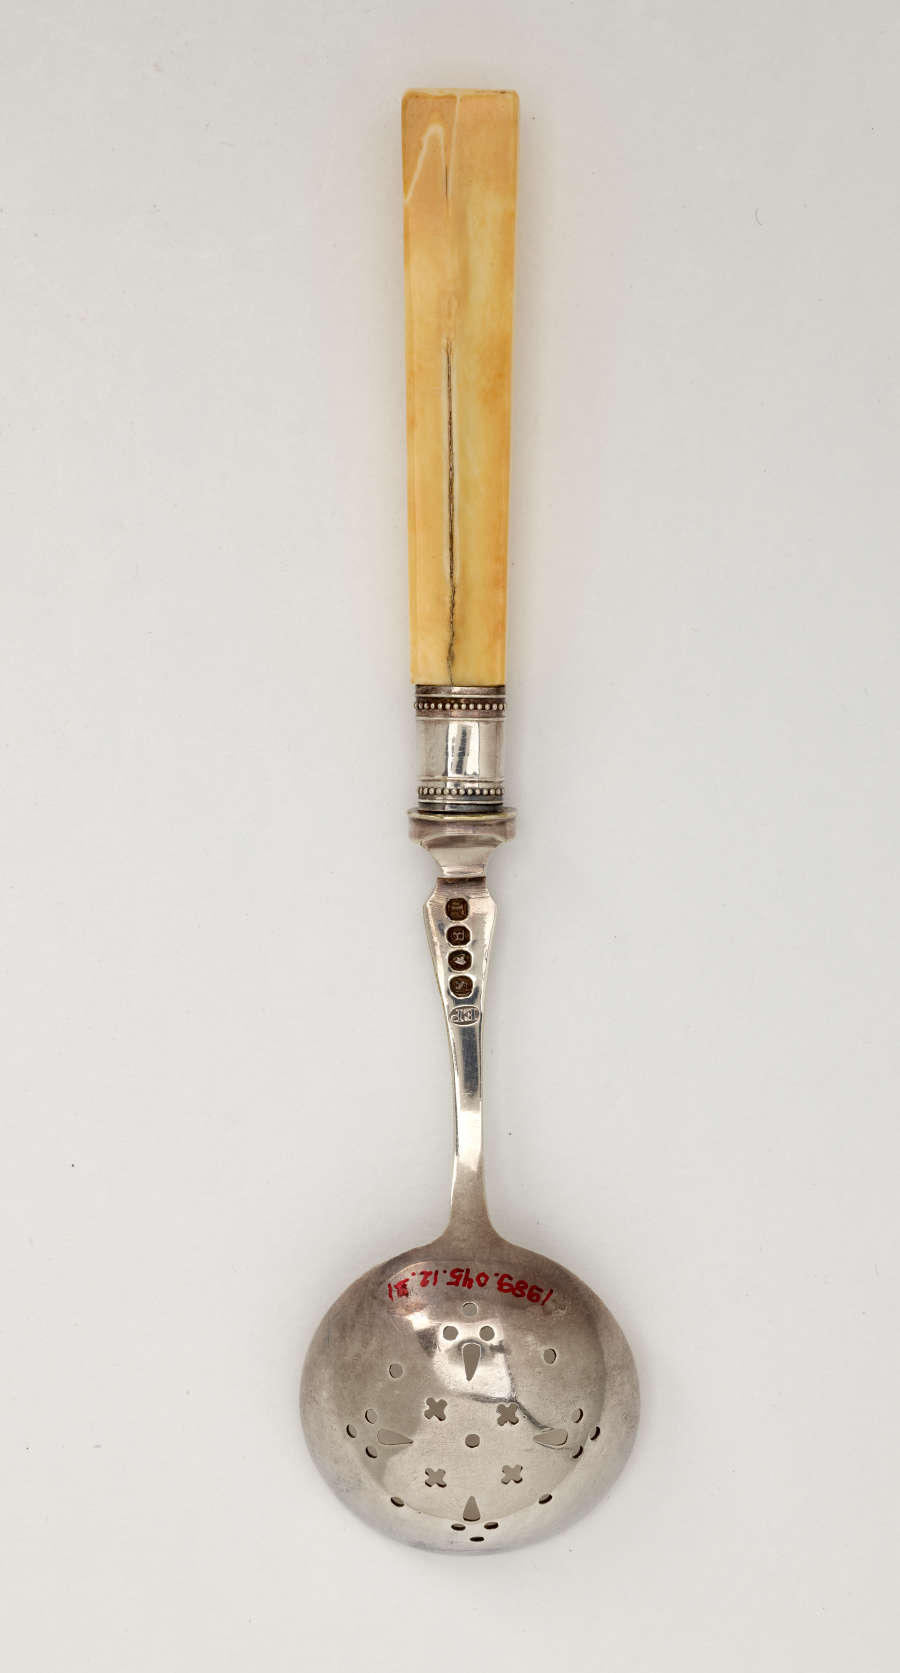 A metal tool with small cutouts in the bowl and an ivory handle.